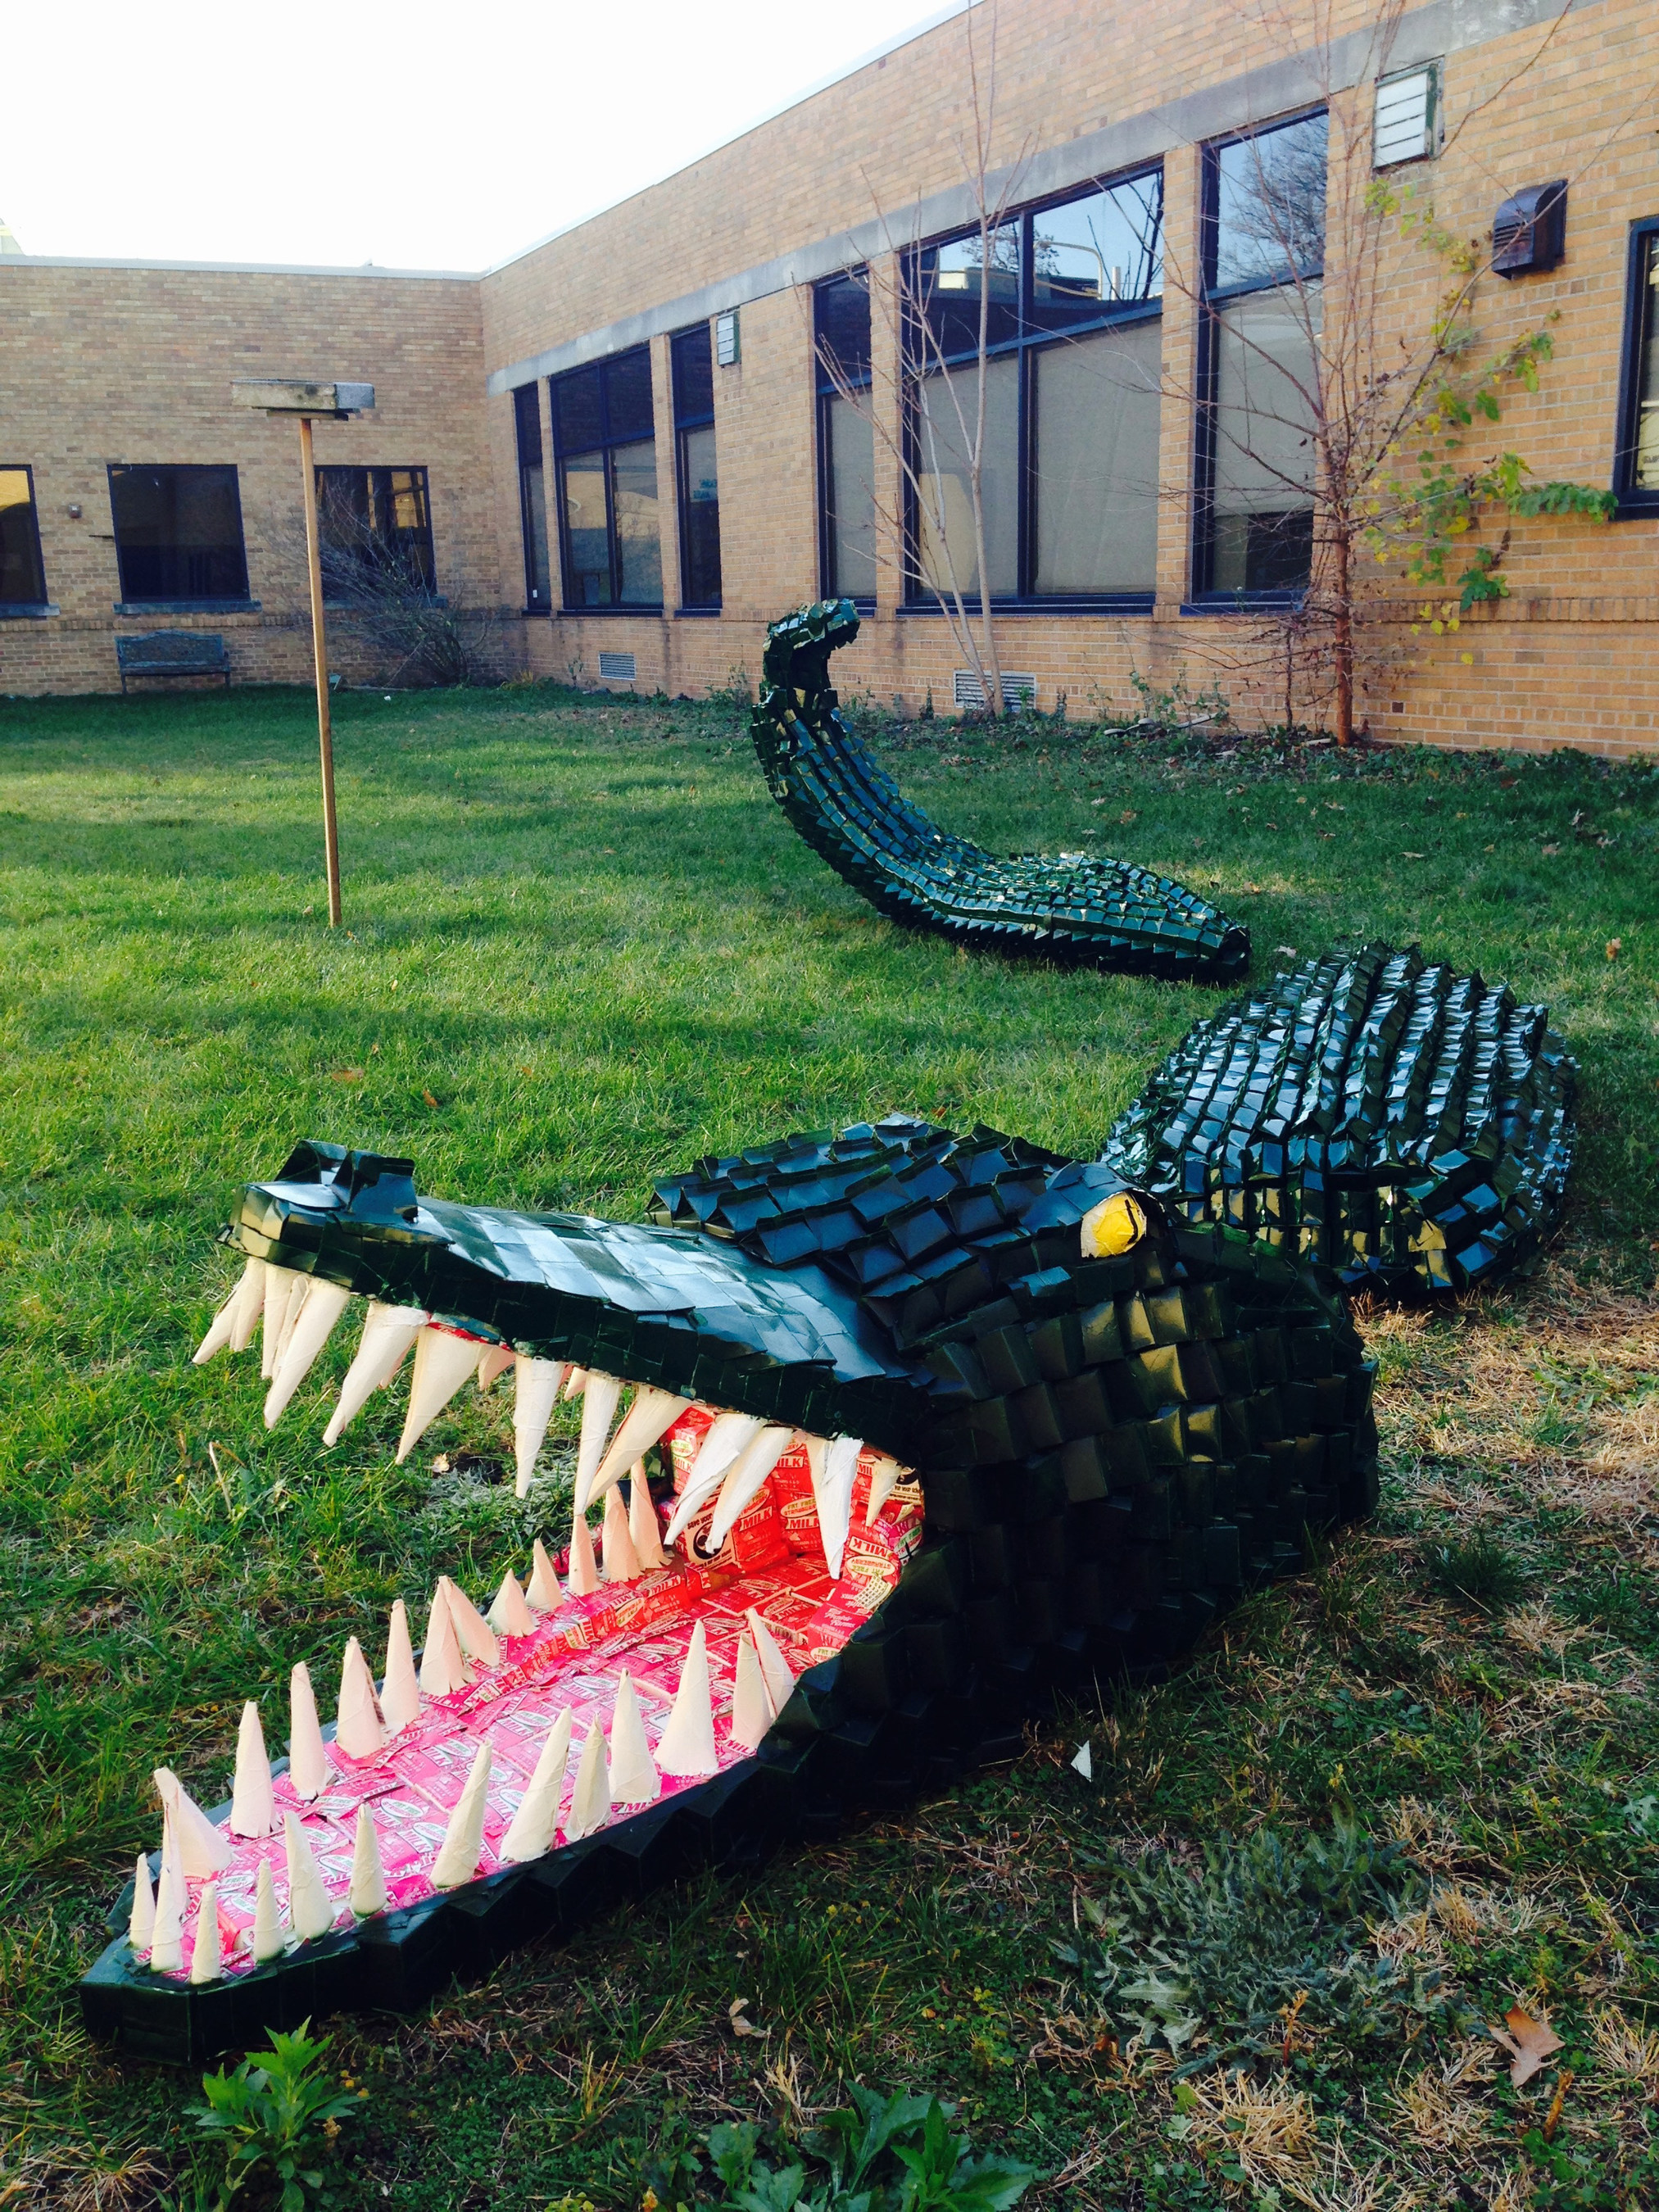 Southfield Regional Academic Campus from Southfield, Michigan, won the Made By Milk(TM) 2015 Carton Construction Contest grand prize of $5,000 for their 16-foot carton sculpture Alligator, made out of 1,345 repurposed milk cartons.